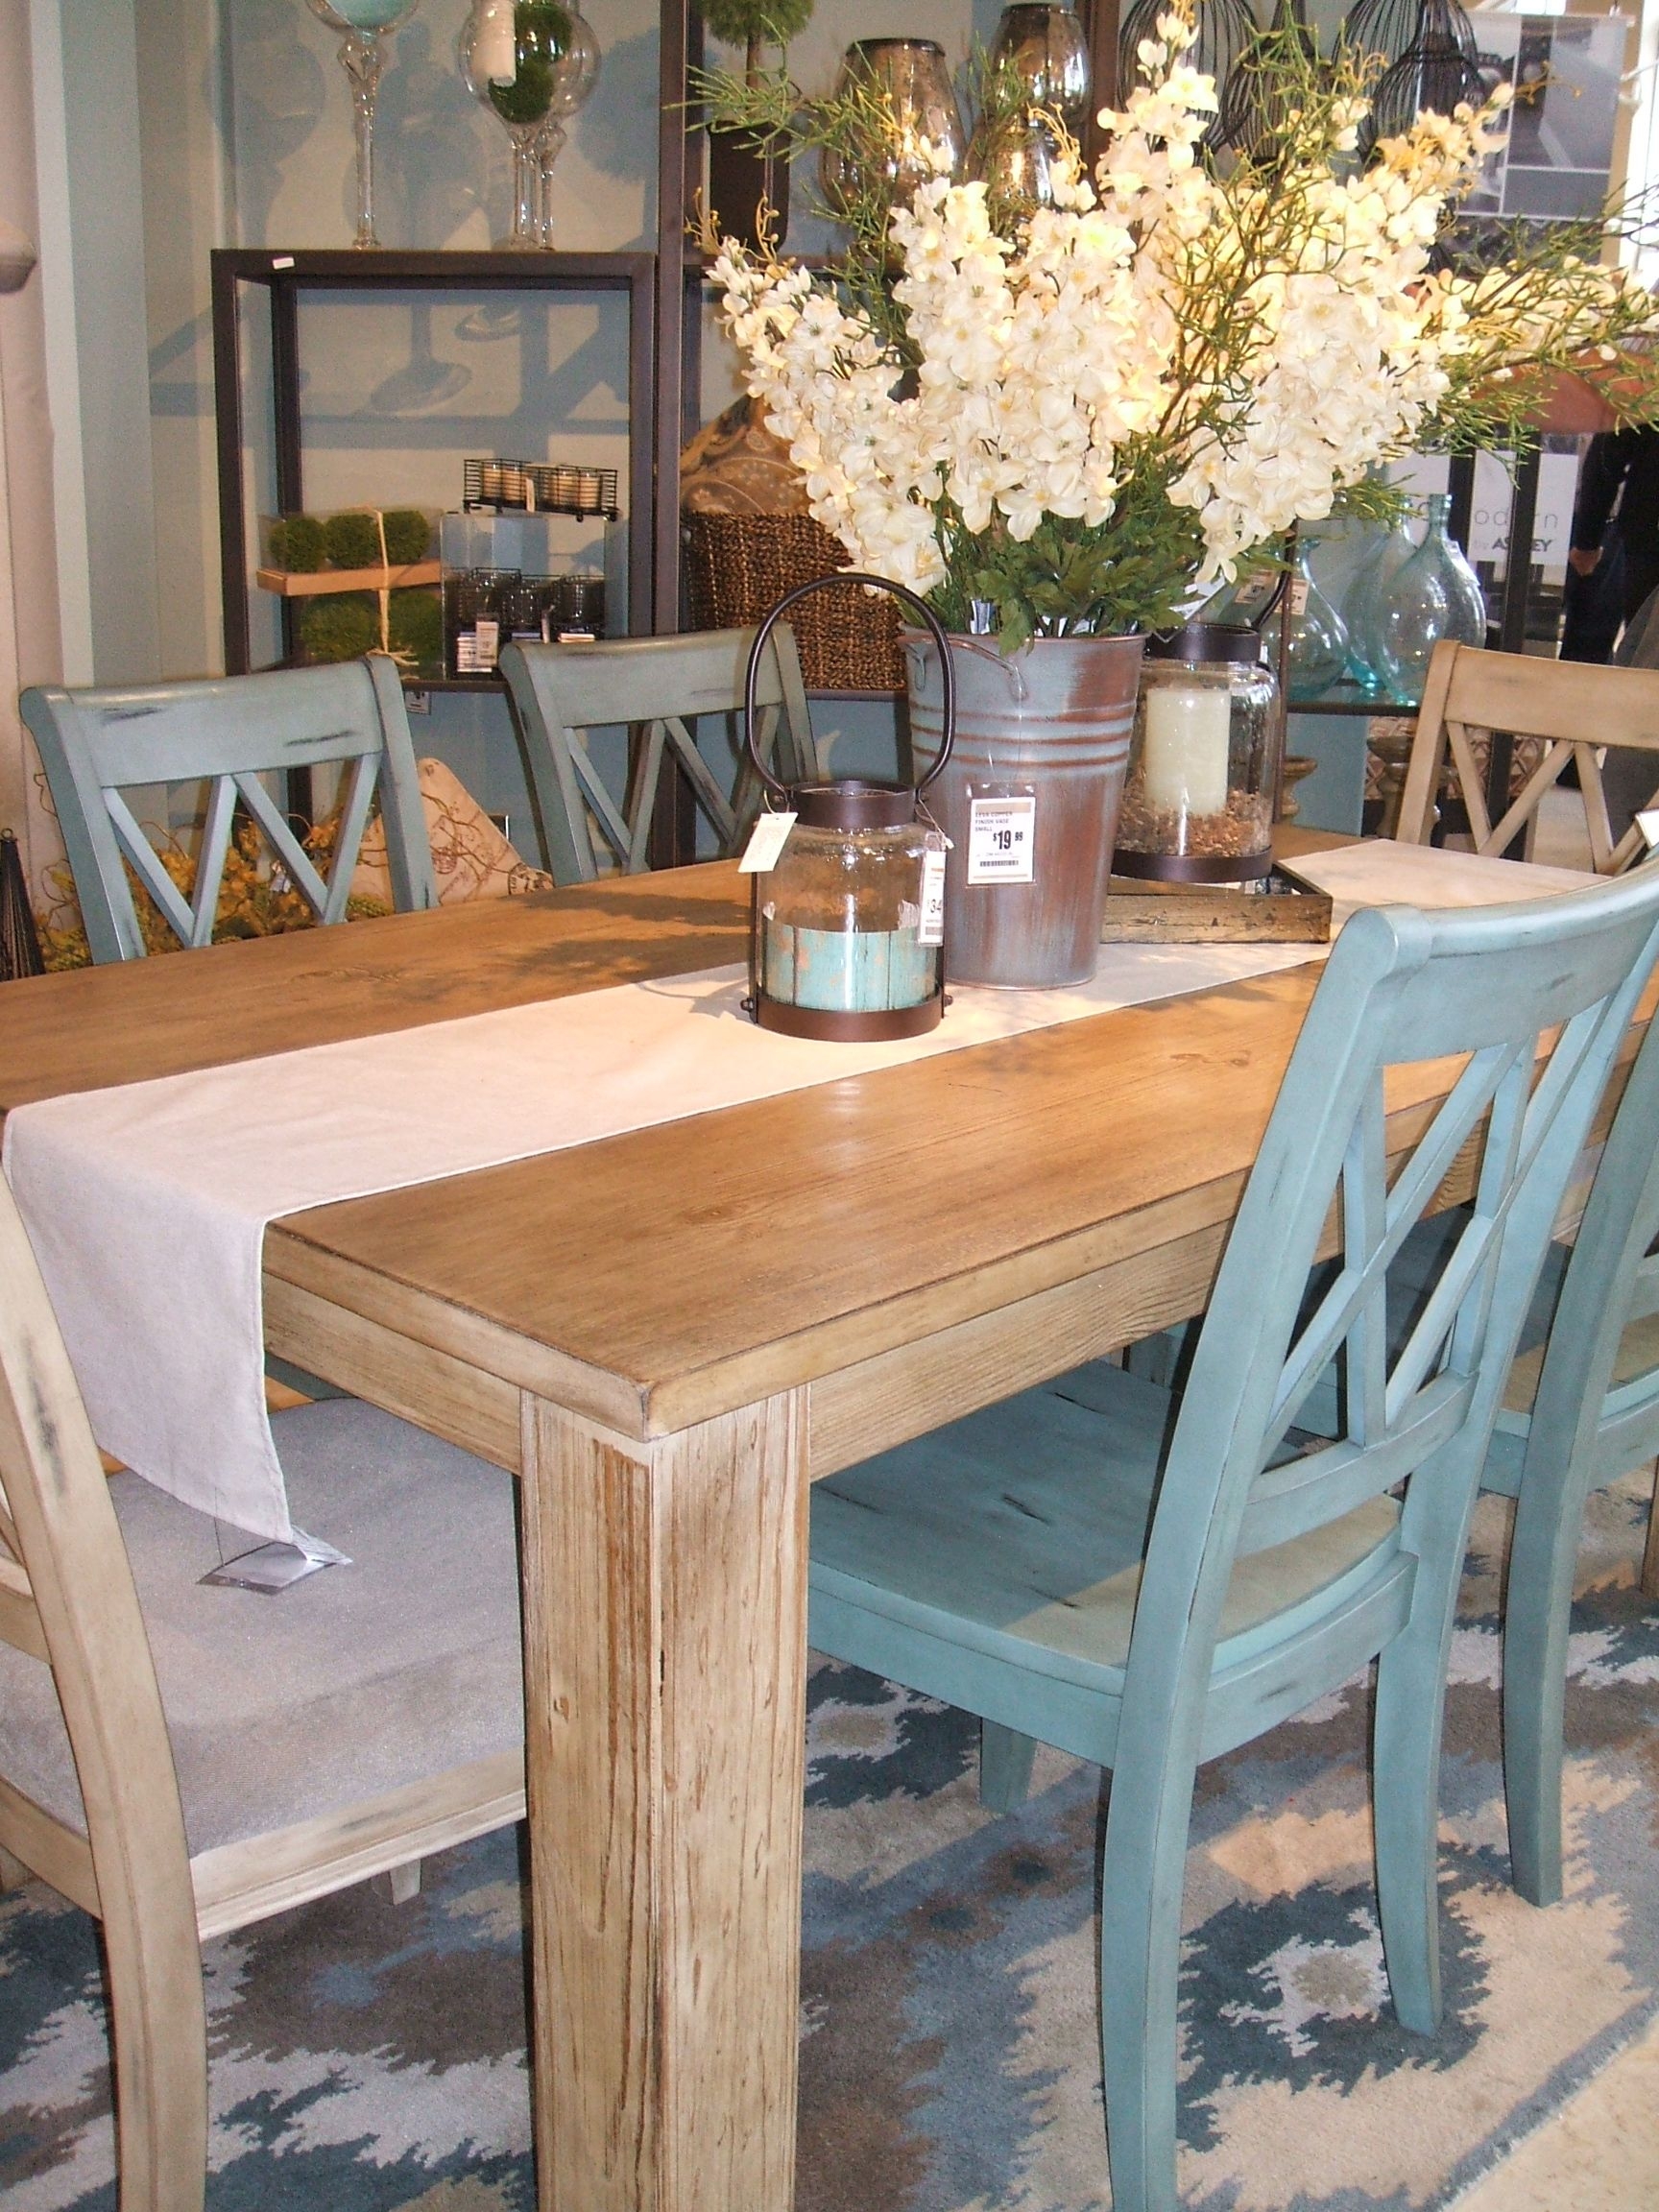 Farmhouse Style Table And Chairs Ideas On Foter